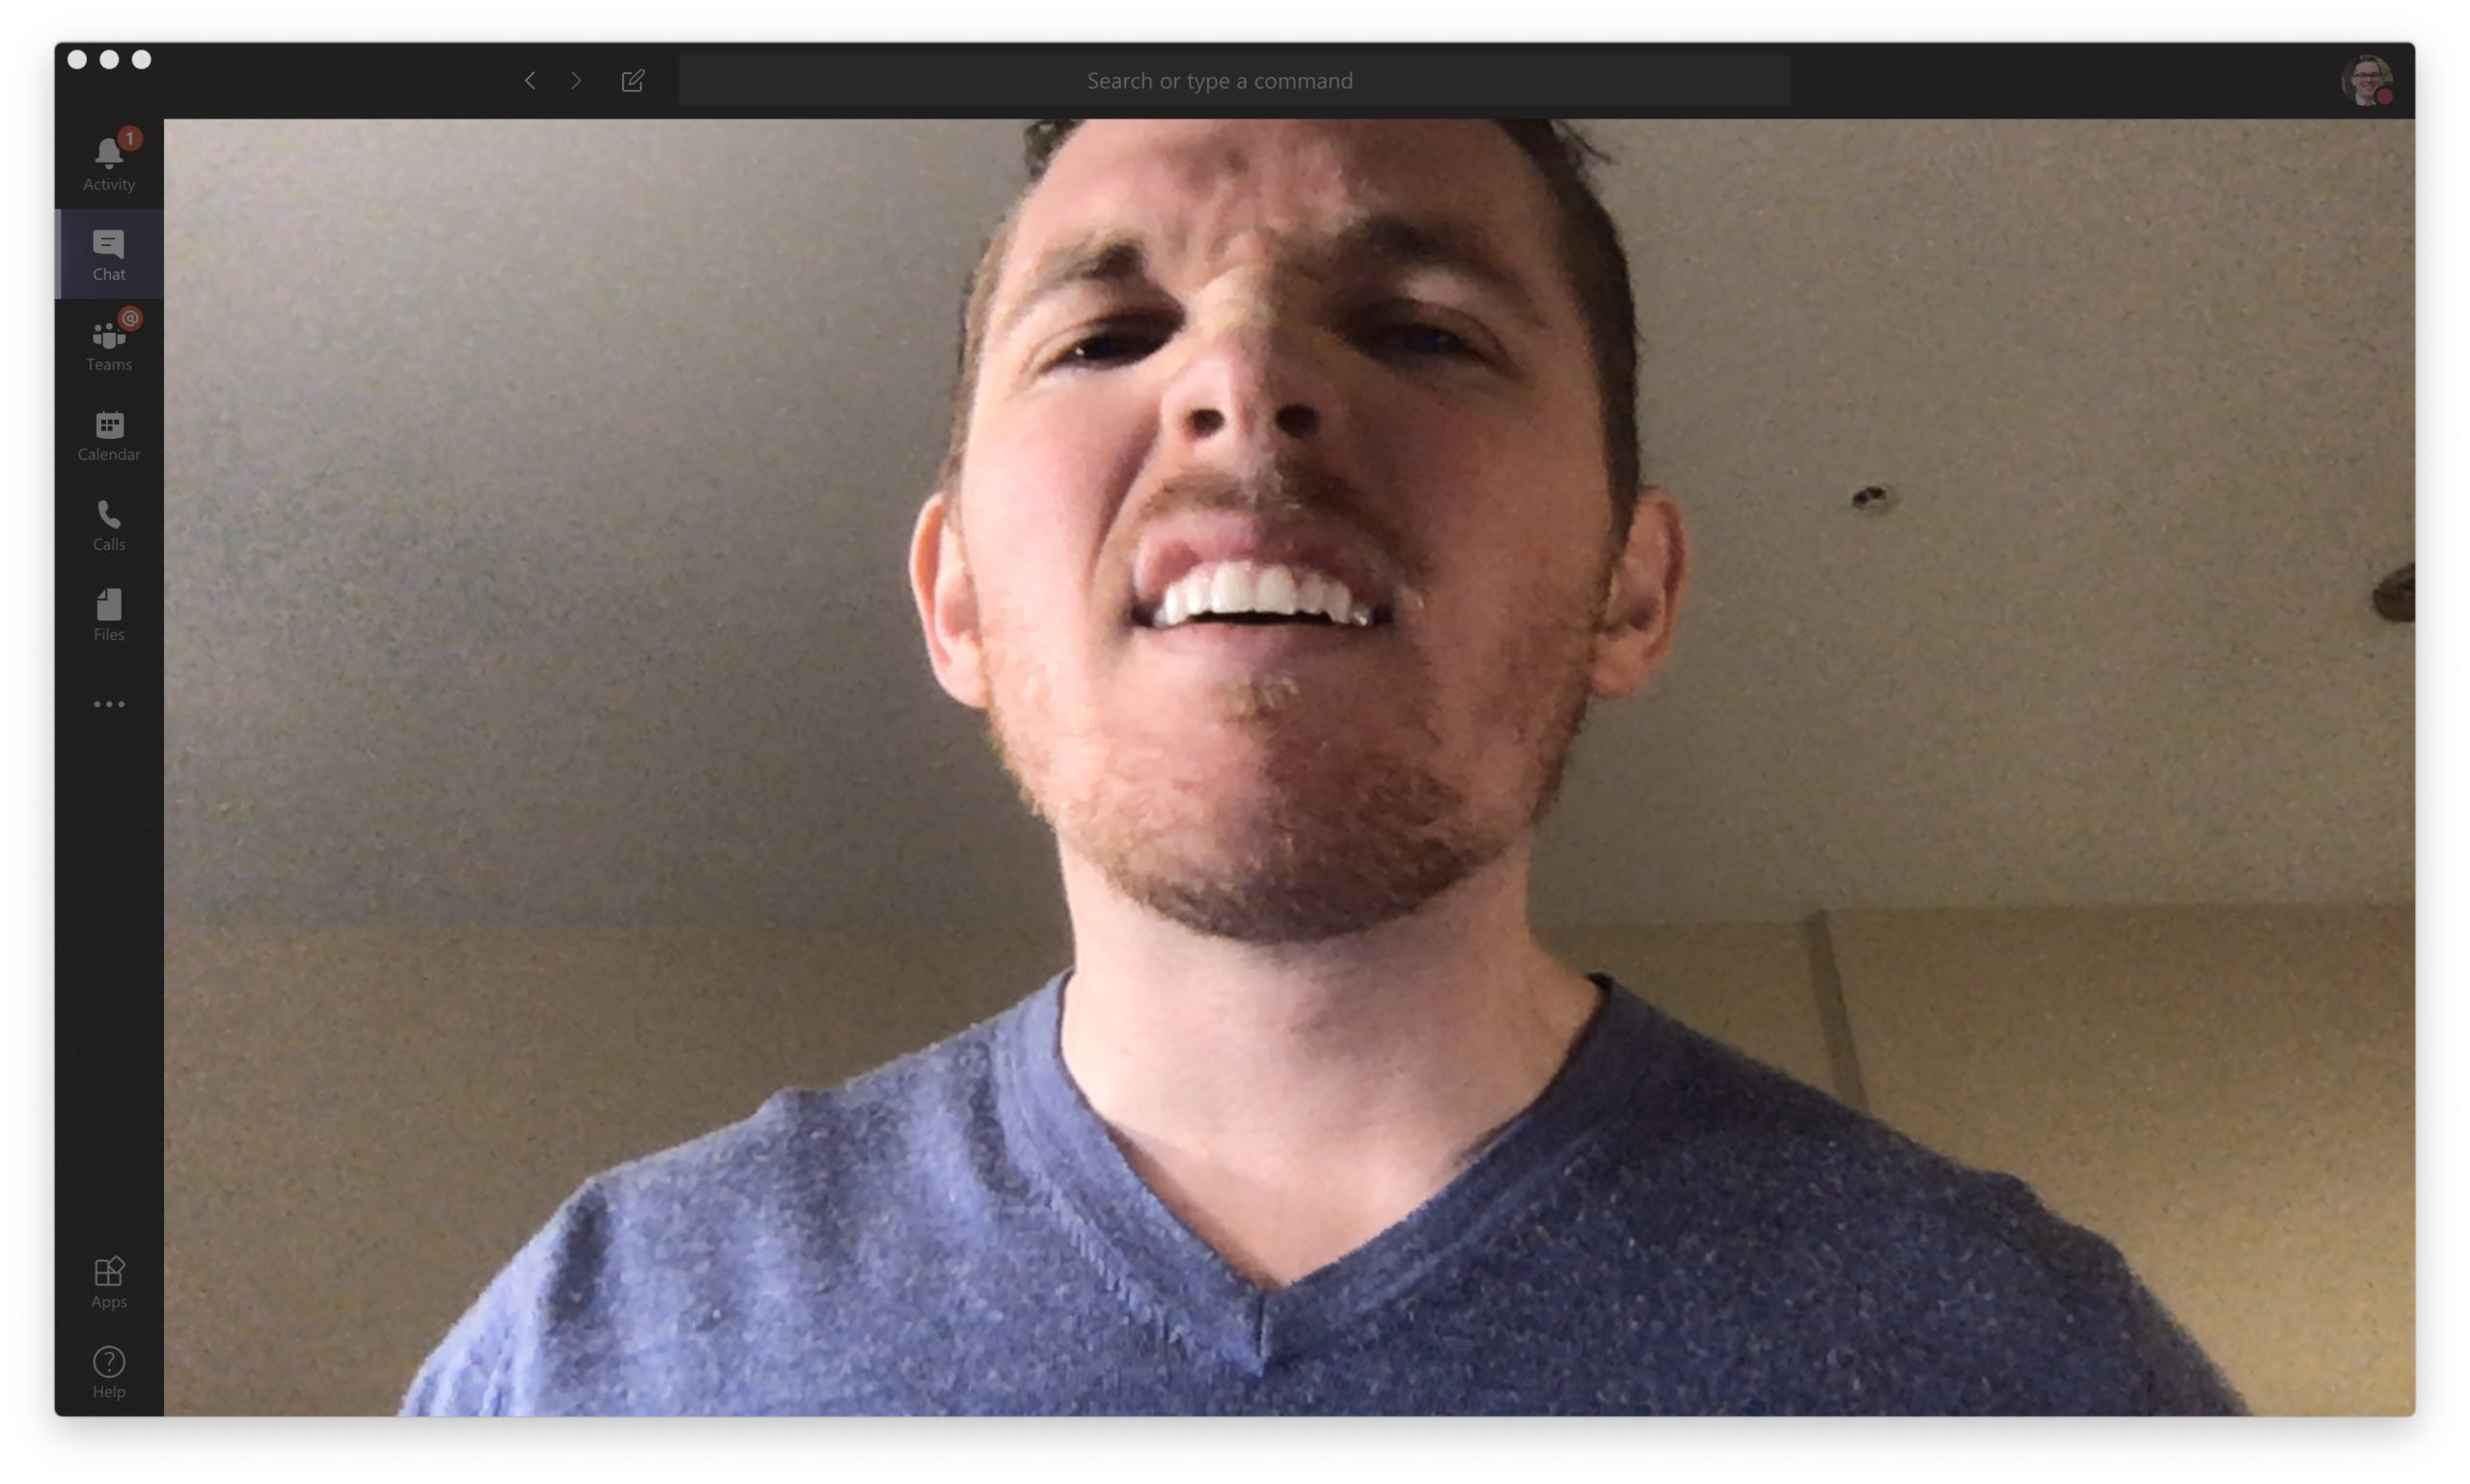 A Caucasian male on a video conferencing call with bad framing